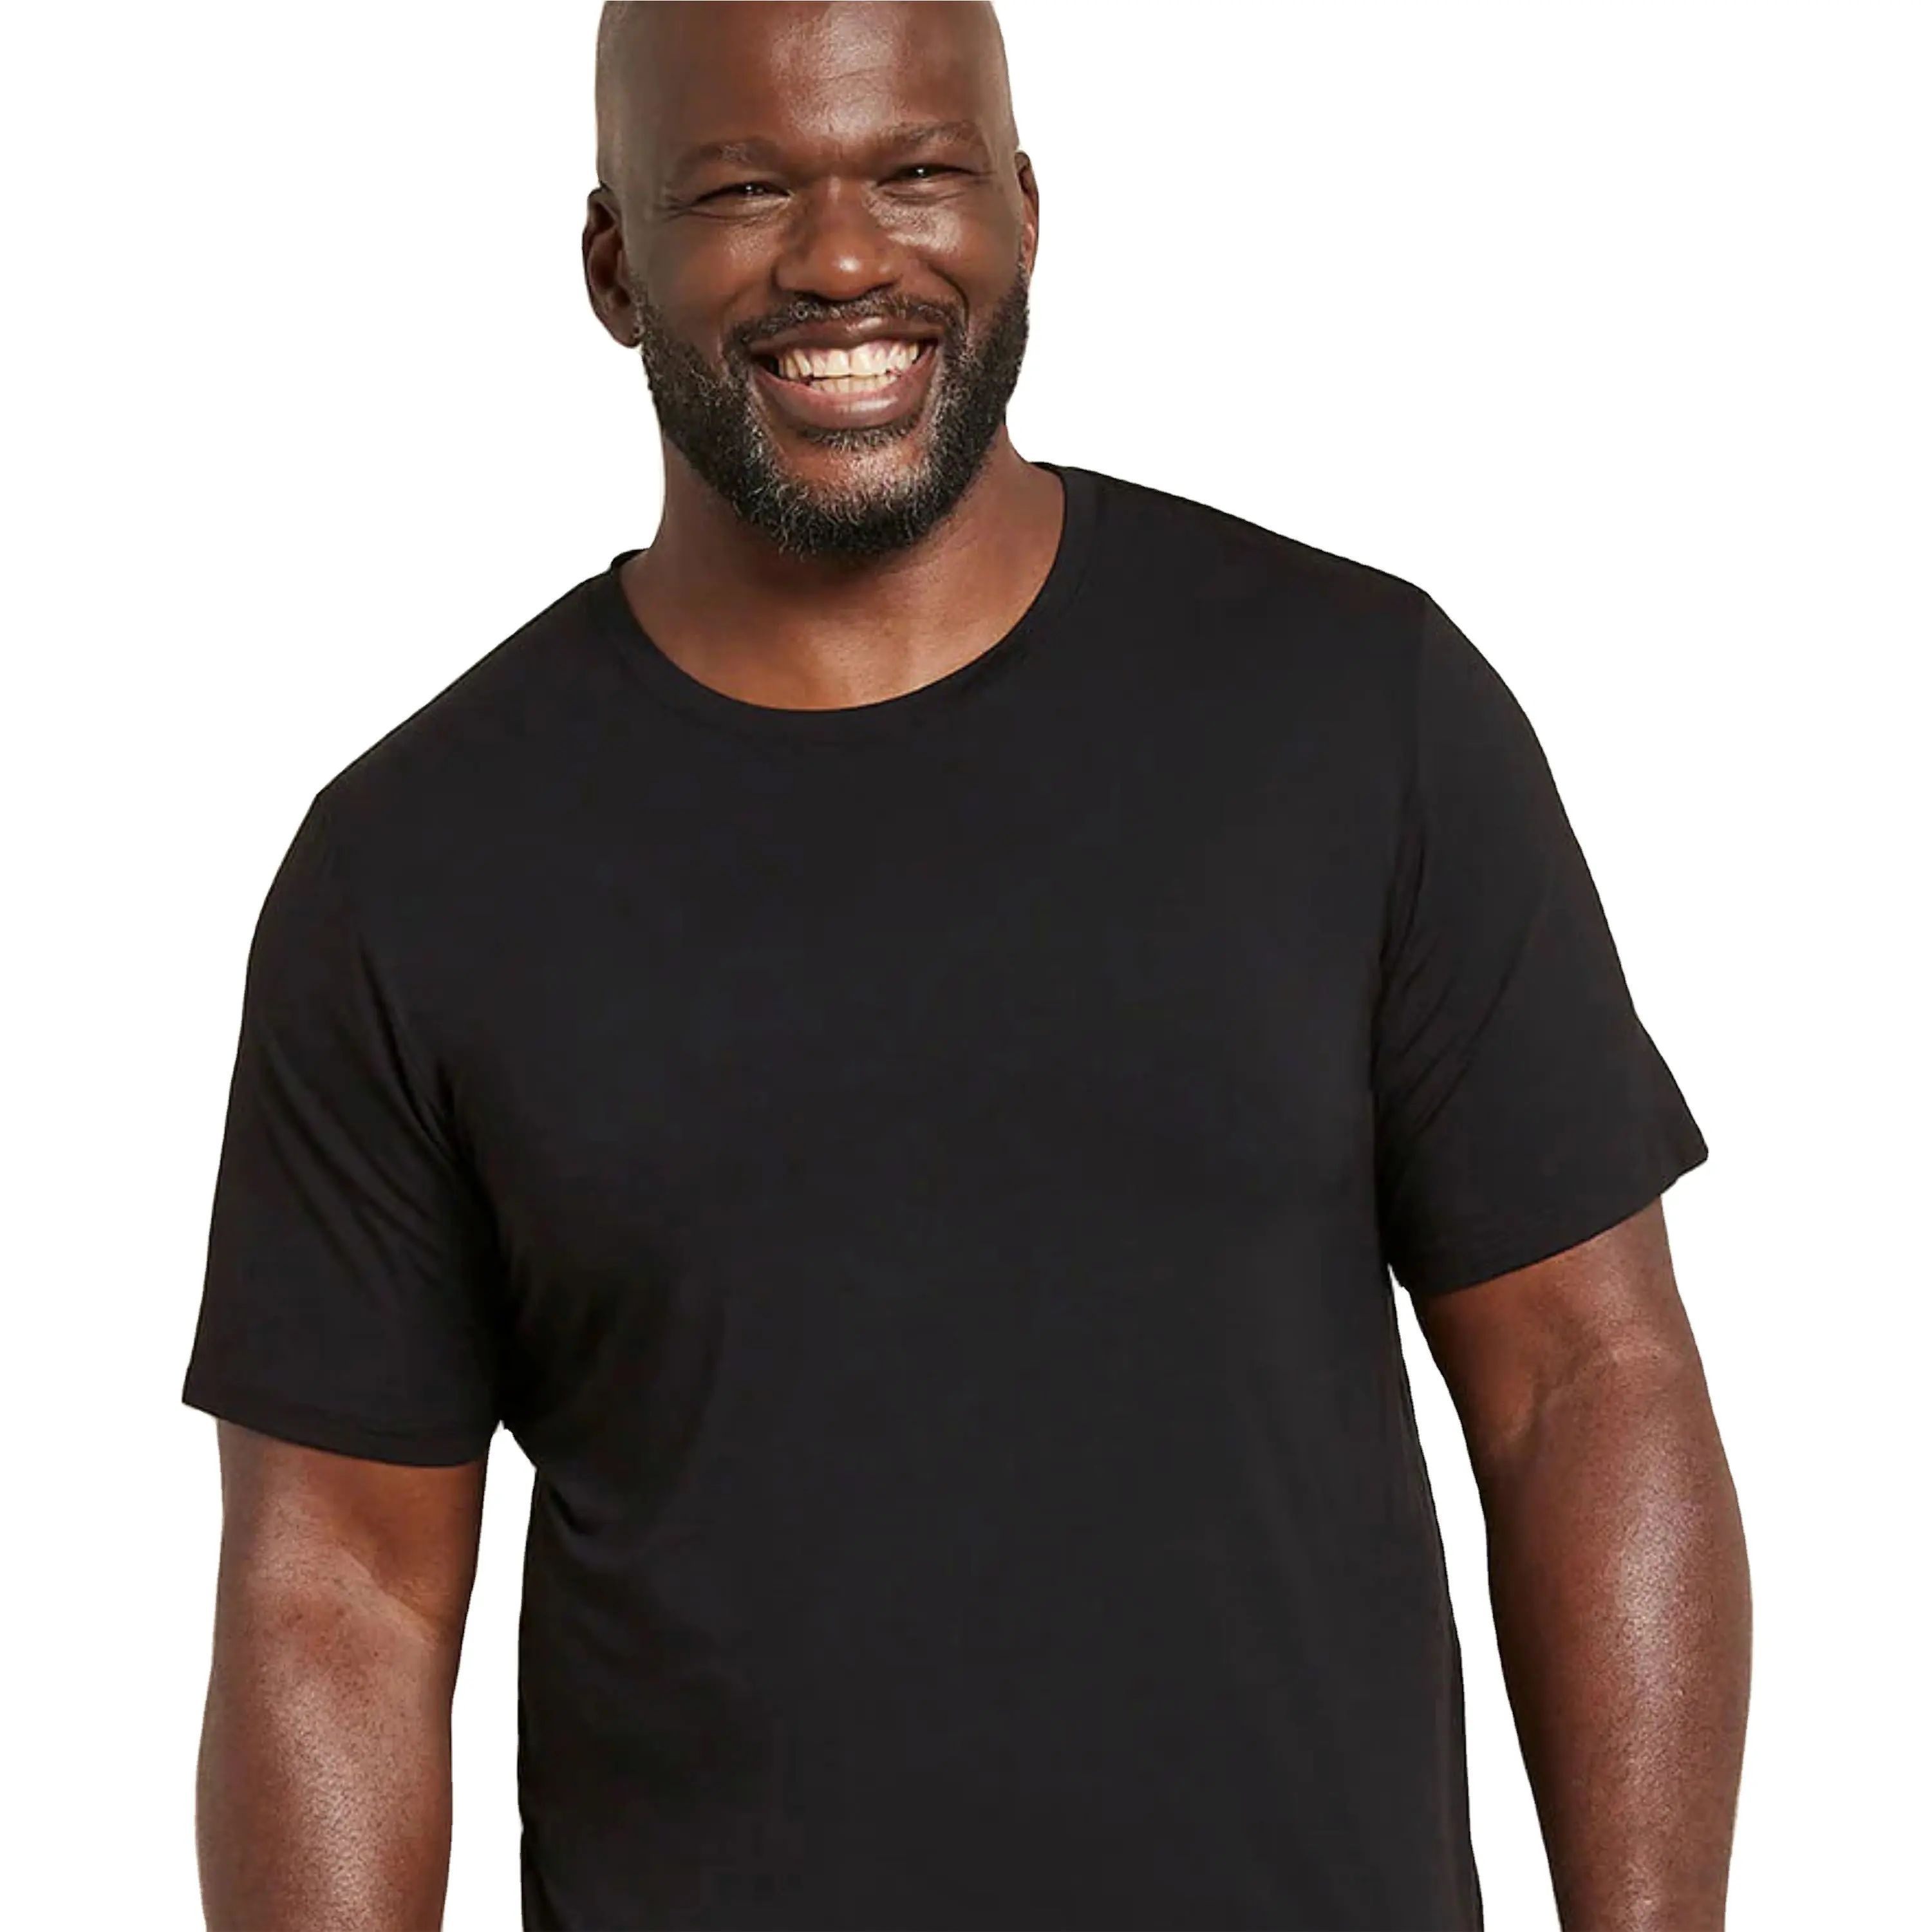 Men's Comfortable Cotton Short Sleeve Crew Neck T-Shirt: Perfect for Everyday Casual Wear, Available in Multiple Colors